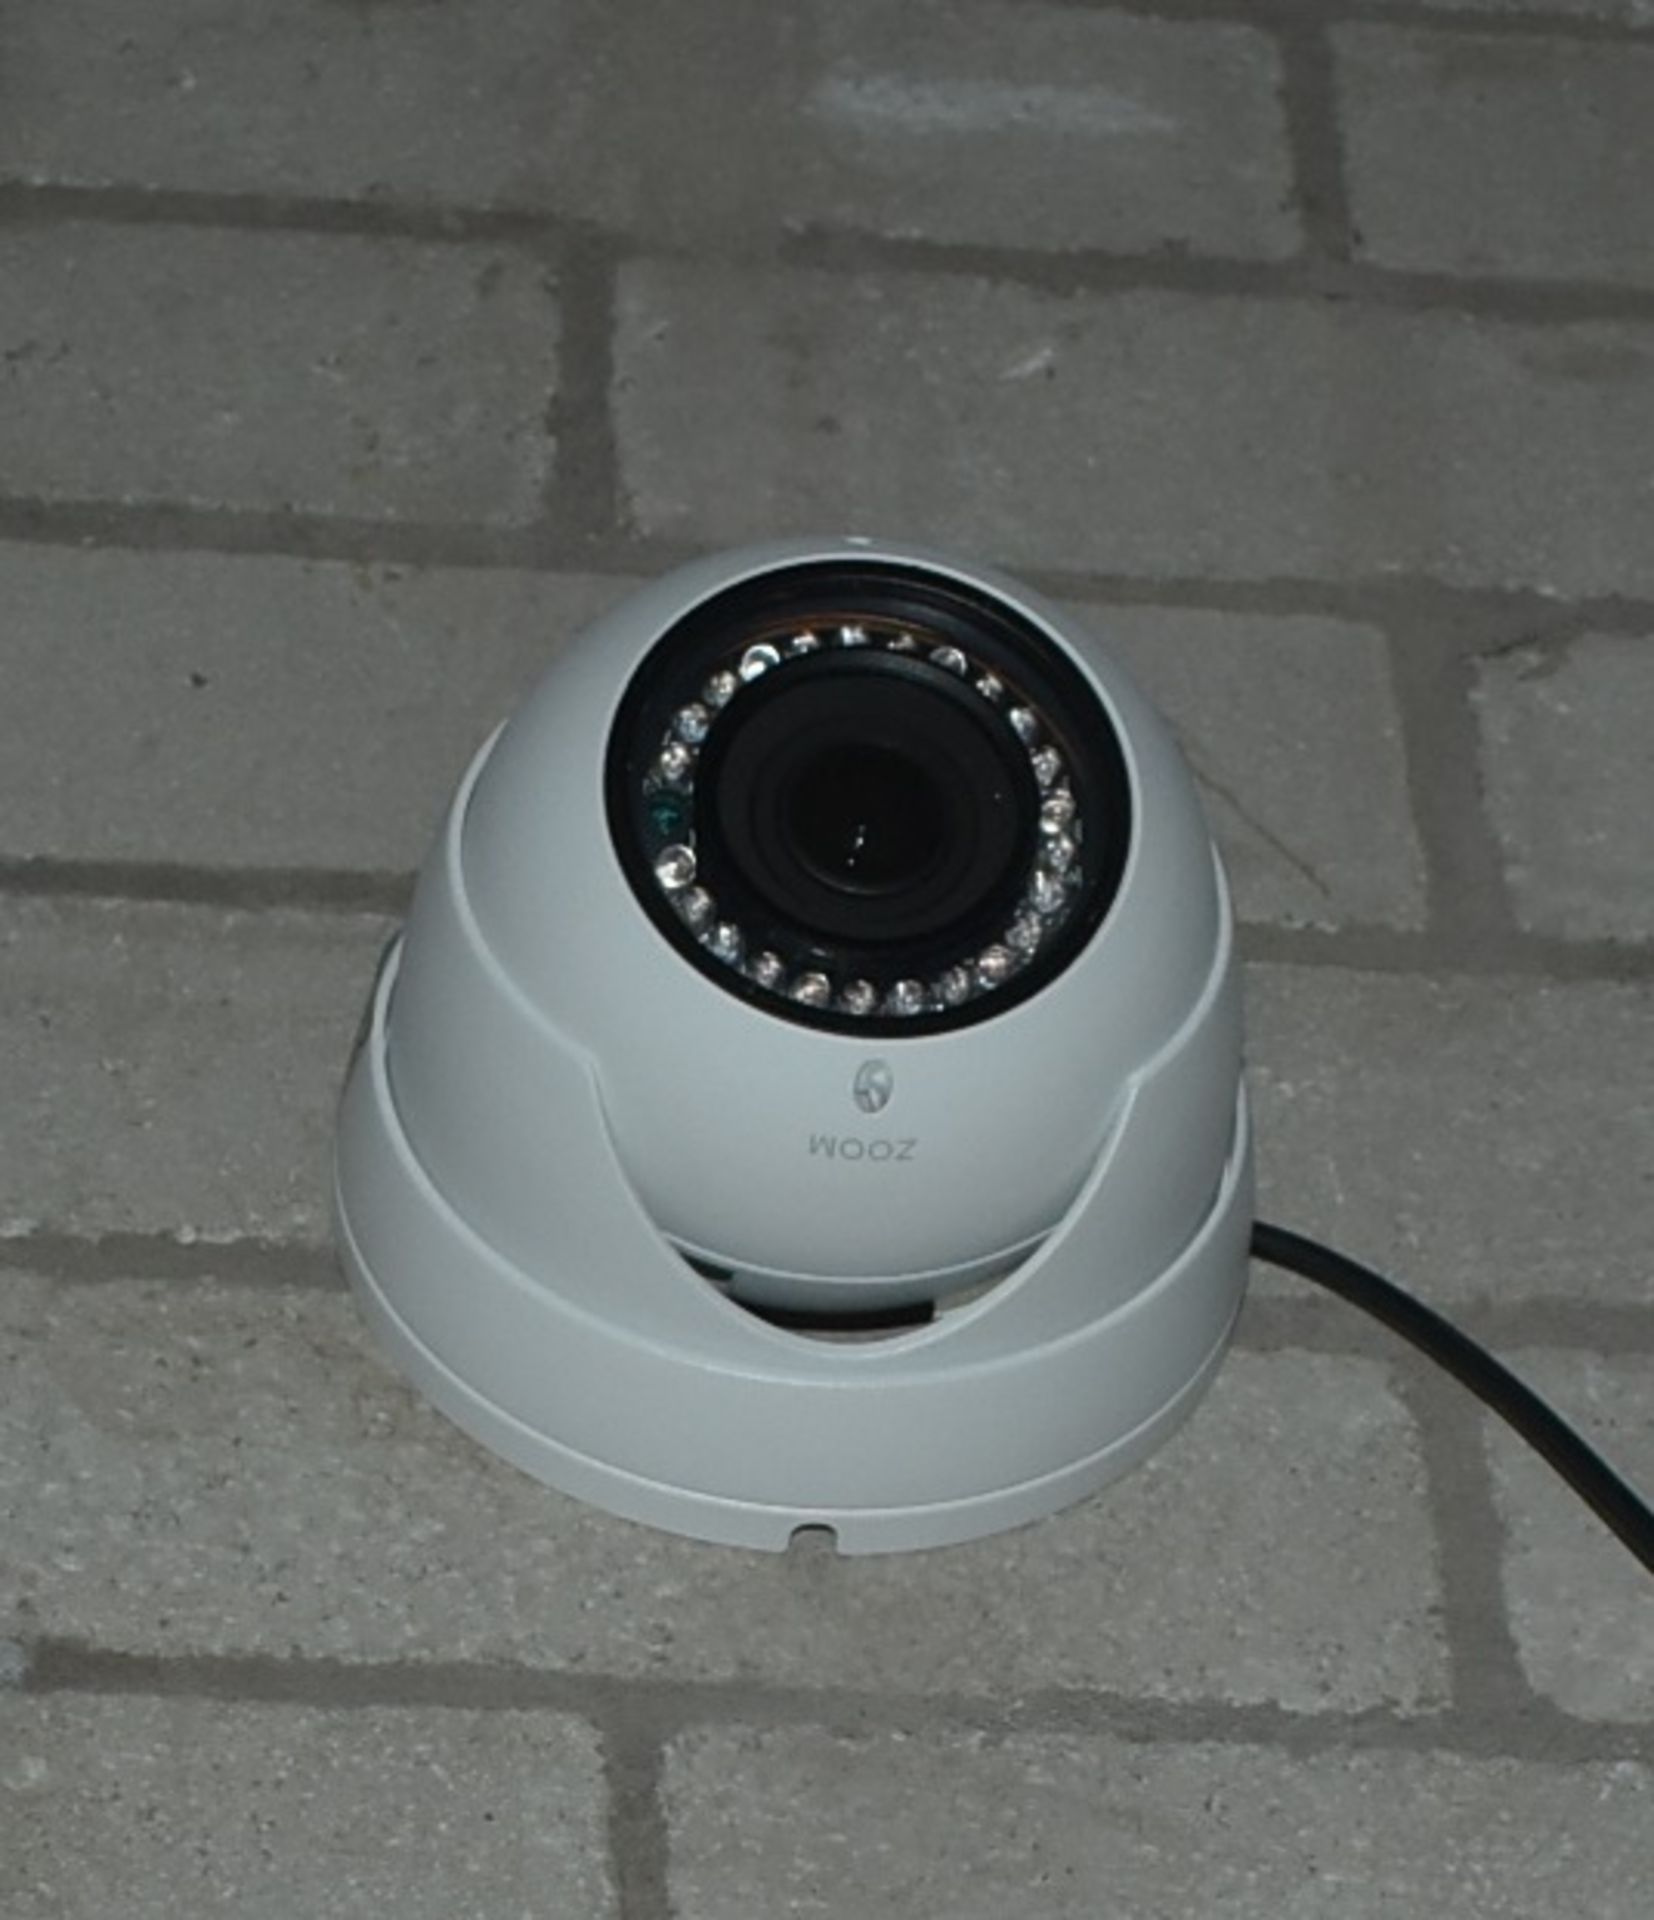 1 x Dalhua CCTV System With 8 Dome Cameras and Monitor - CL586 - Location: Stockport SK1 This item - Image 5 of 7